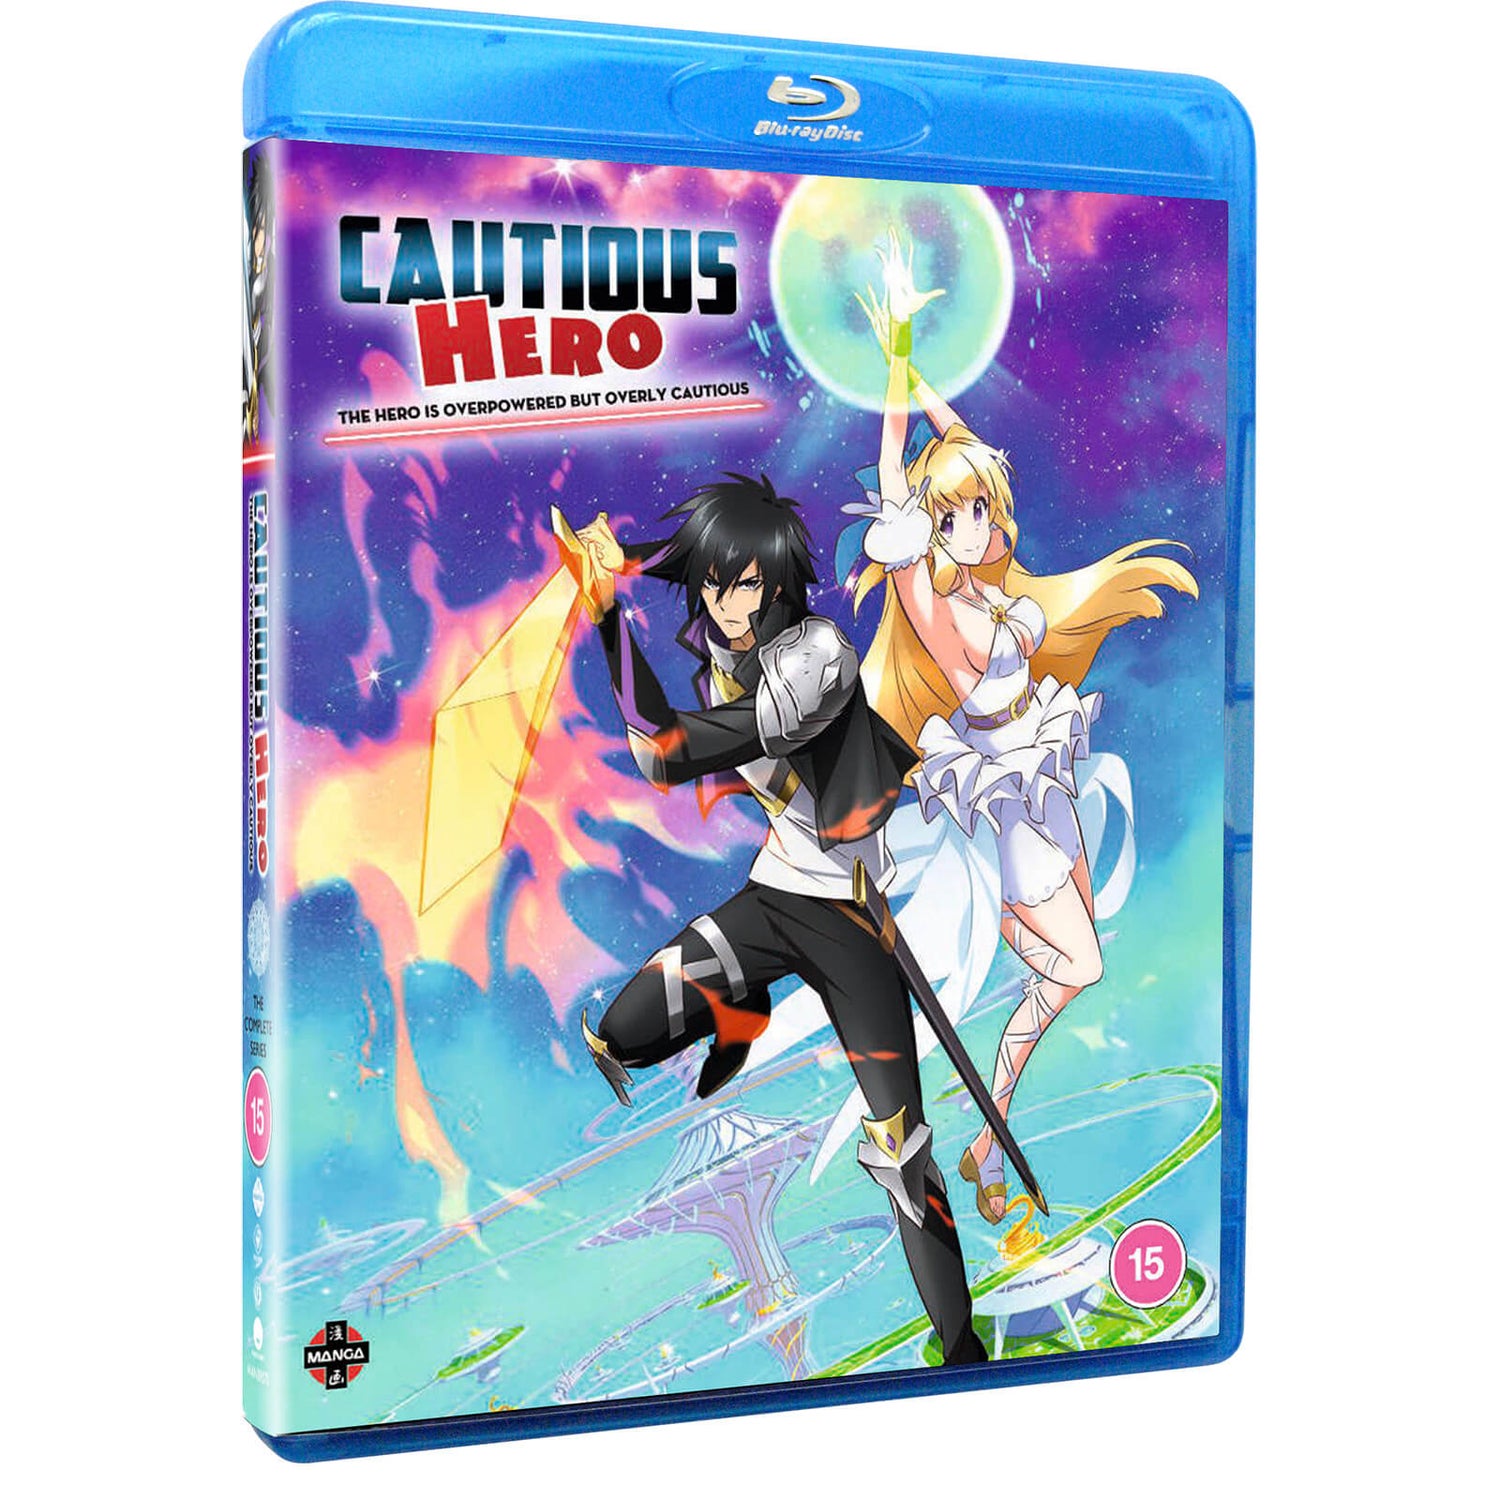 Cautious Hero: The Hero is Overpowered but Overly Cautious - Die komplette Staffel